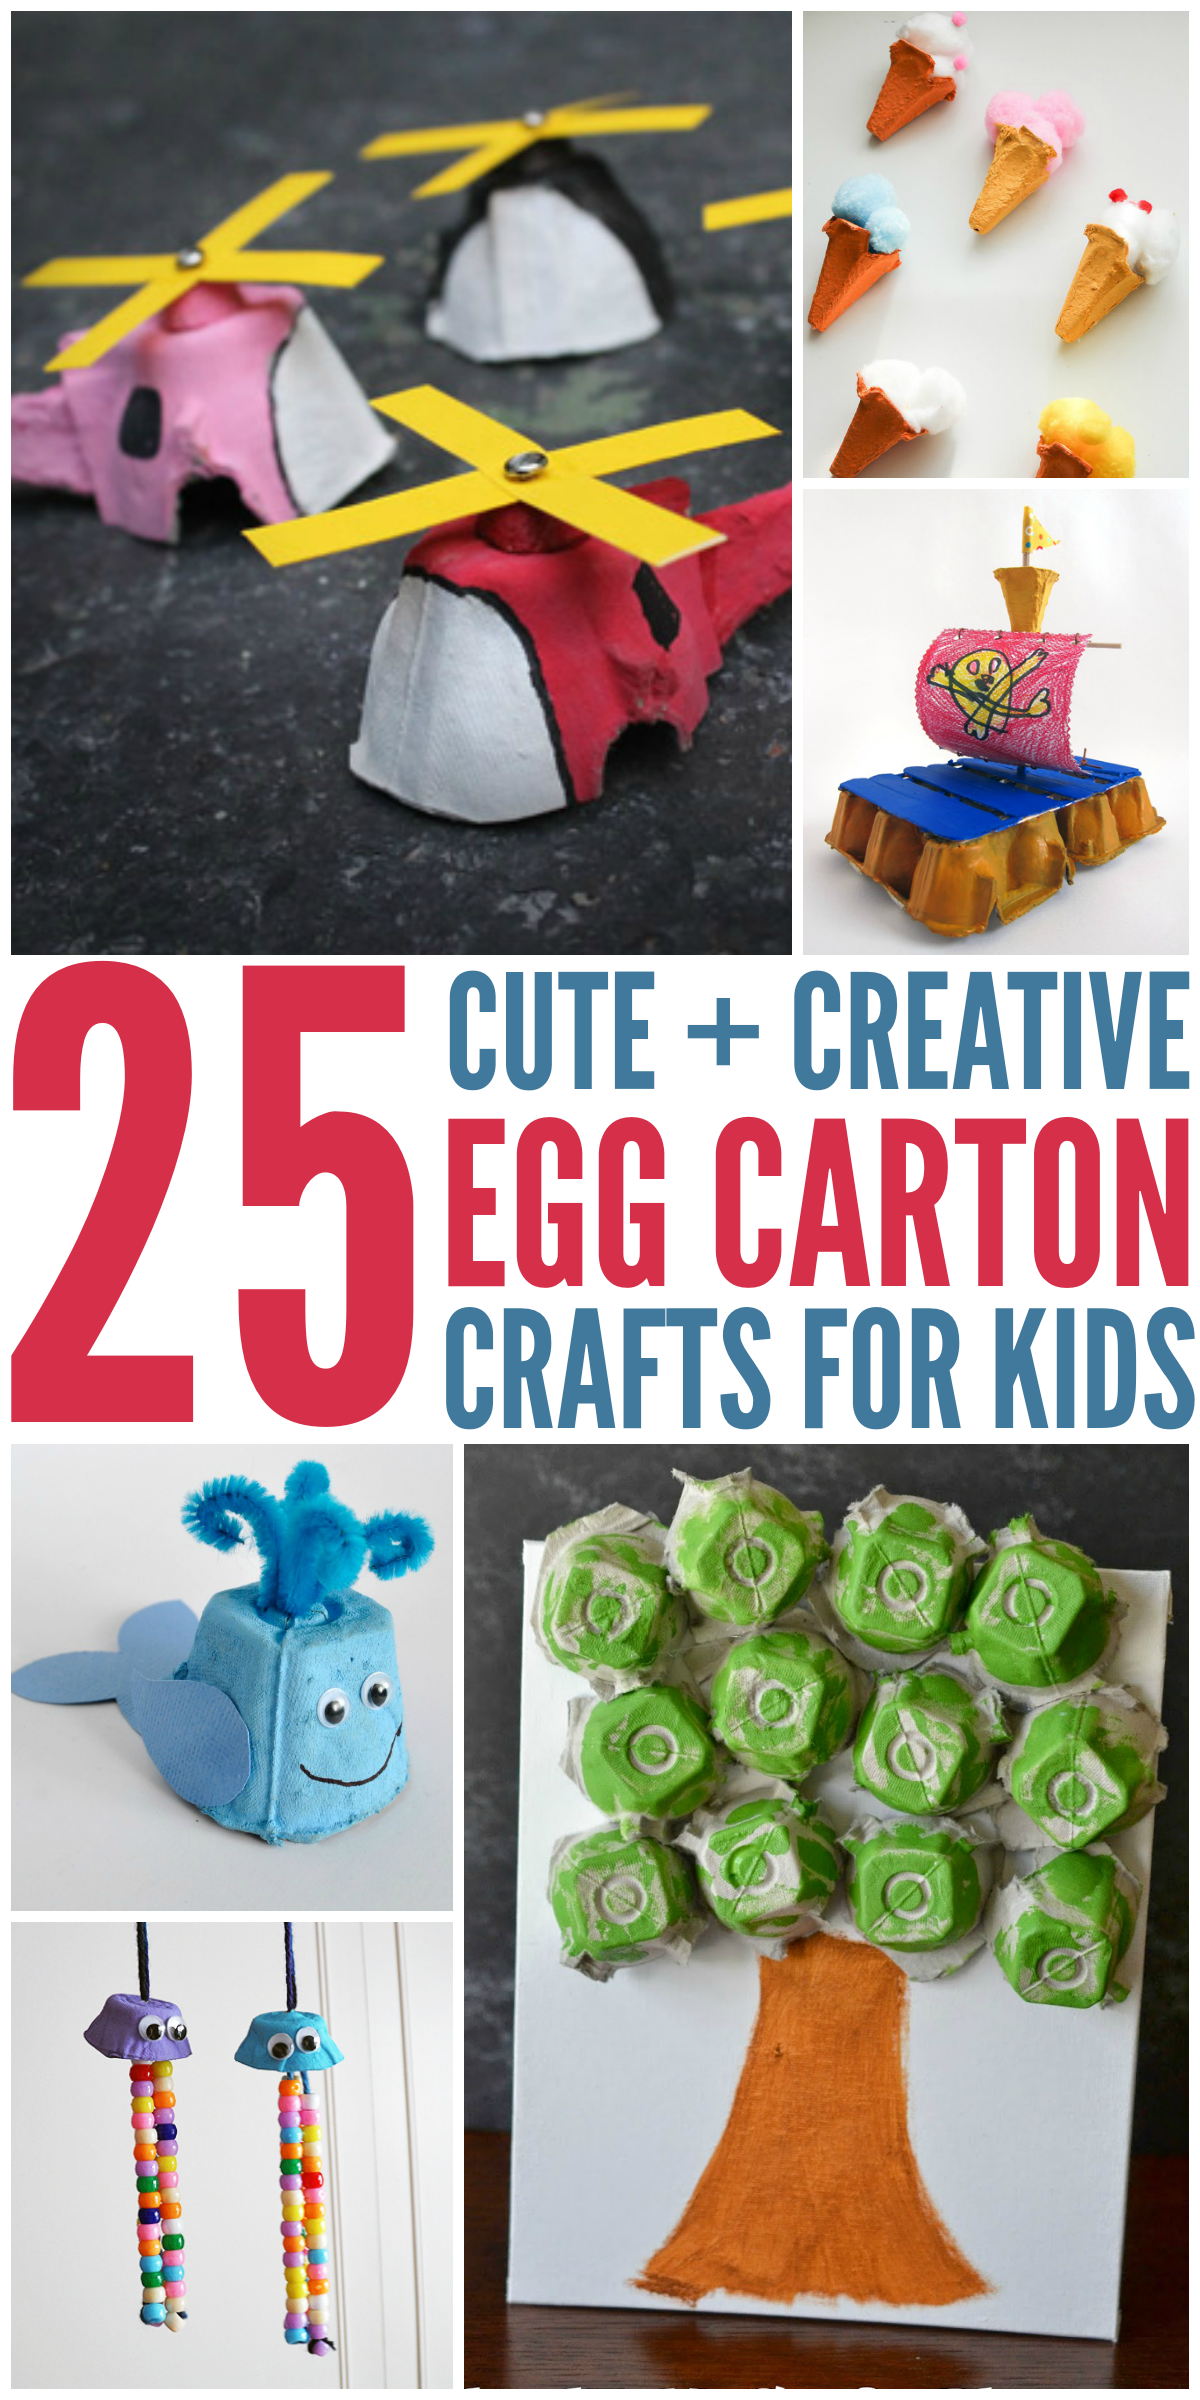 25 Cute and Creative Egg Carton Crafts -   25 young kids crafts
 ideas